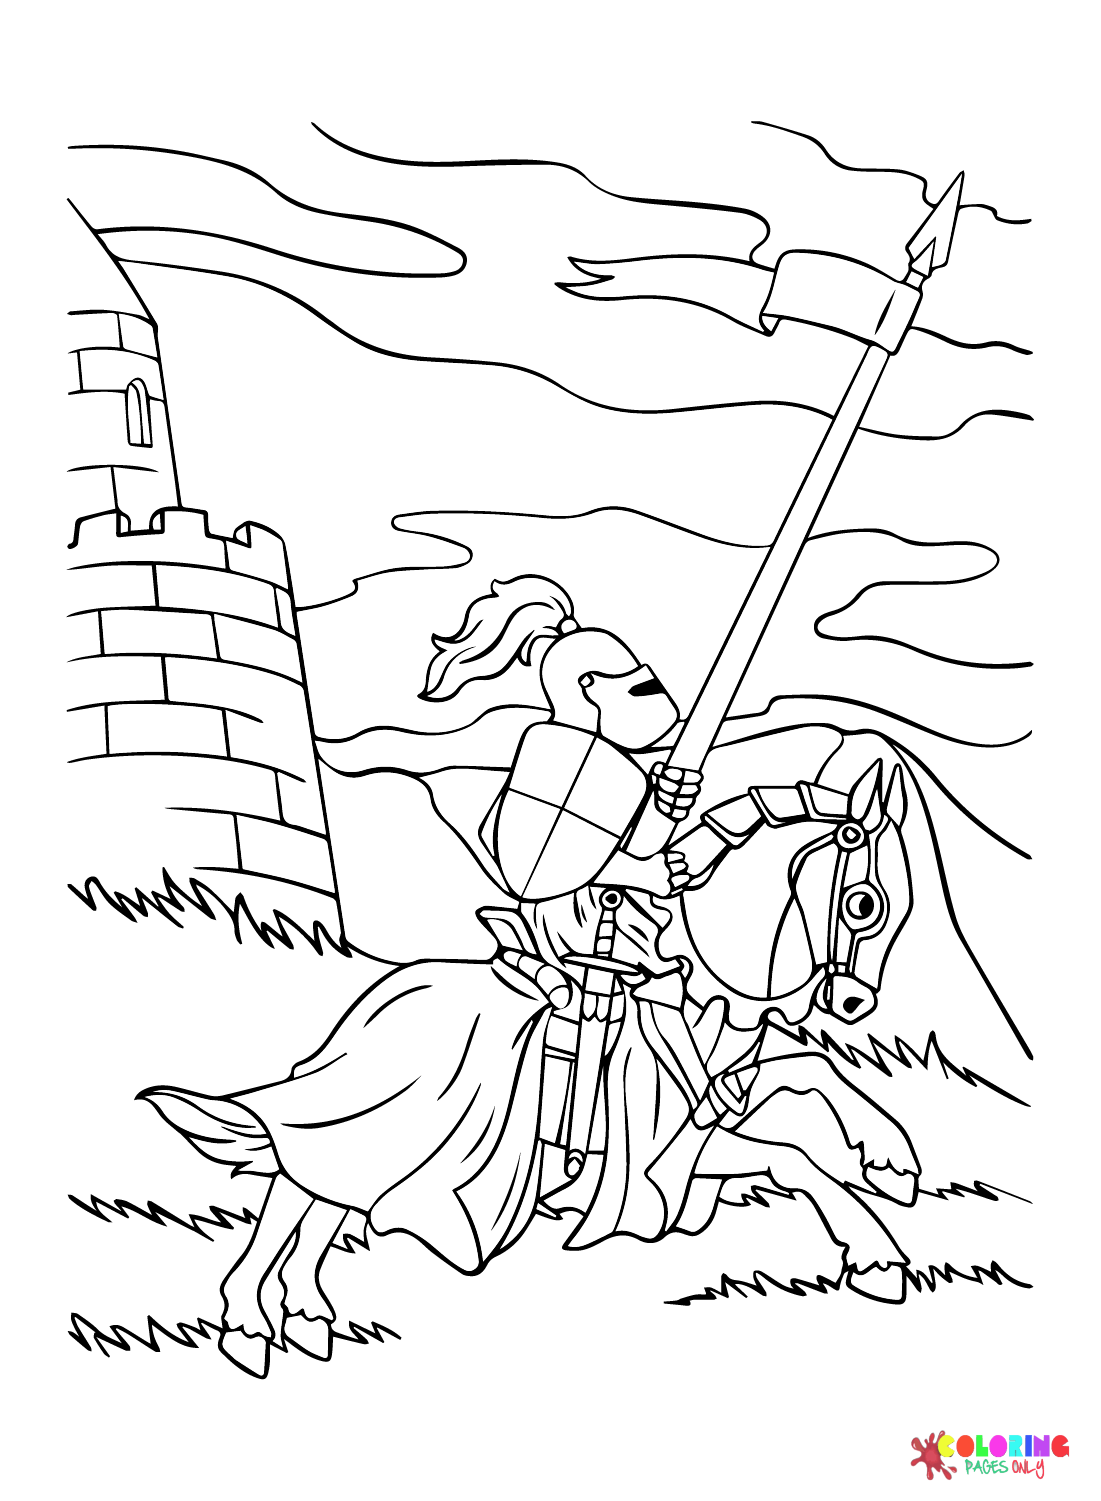 Vector Knight Joust Coloring Page 为孩子 Coloring Page